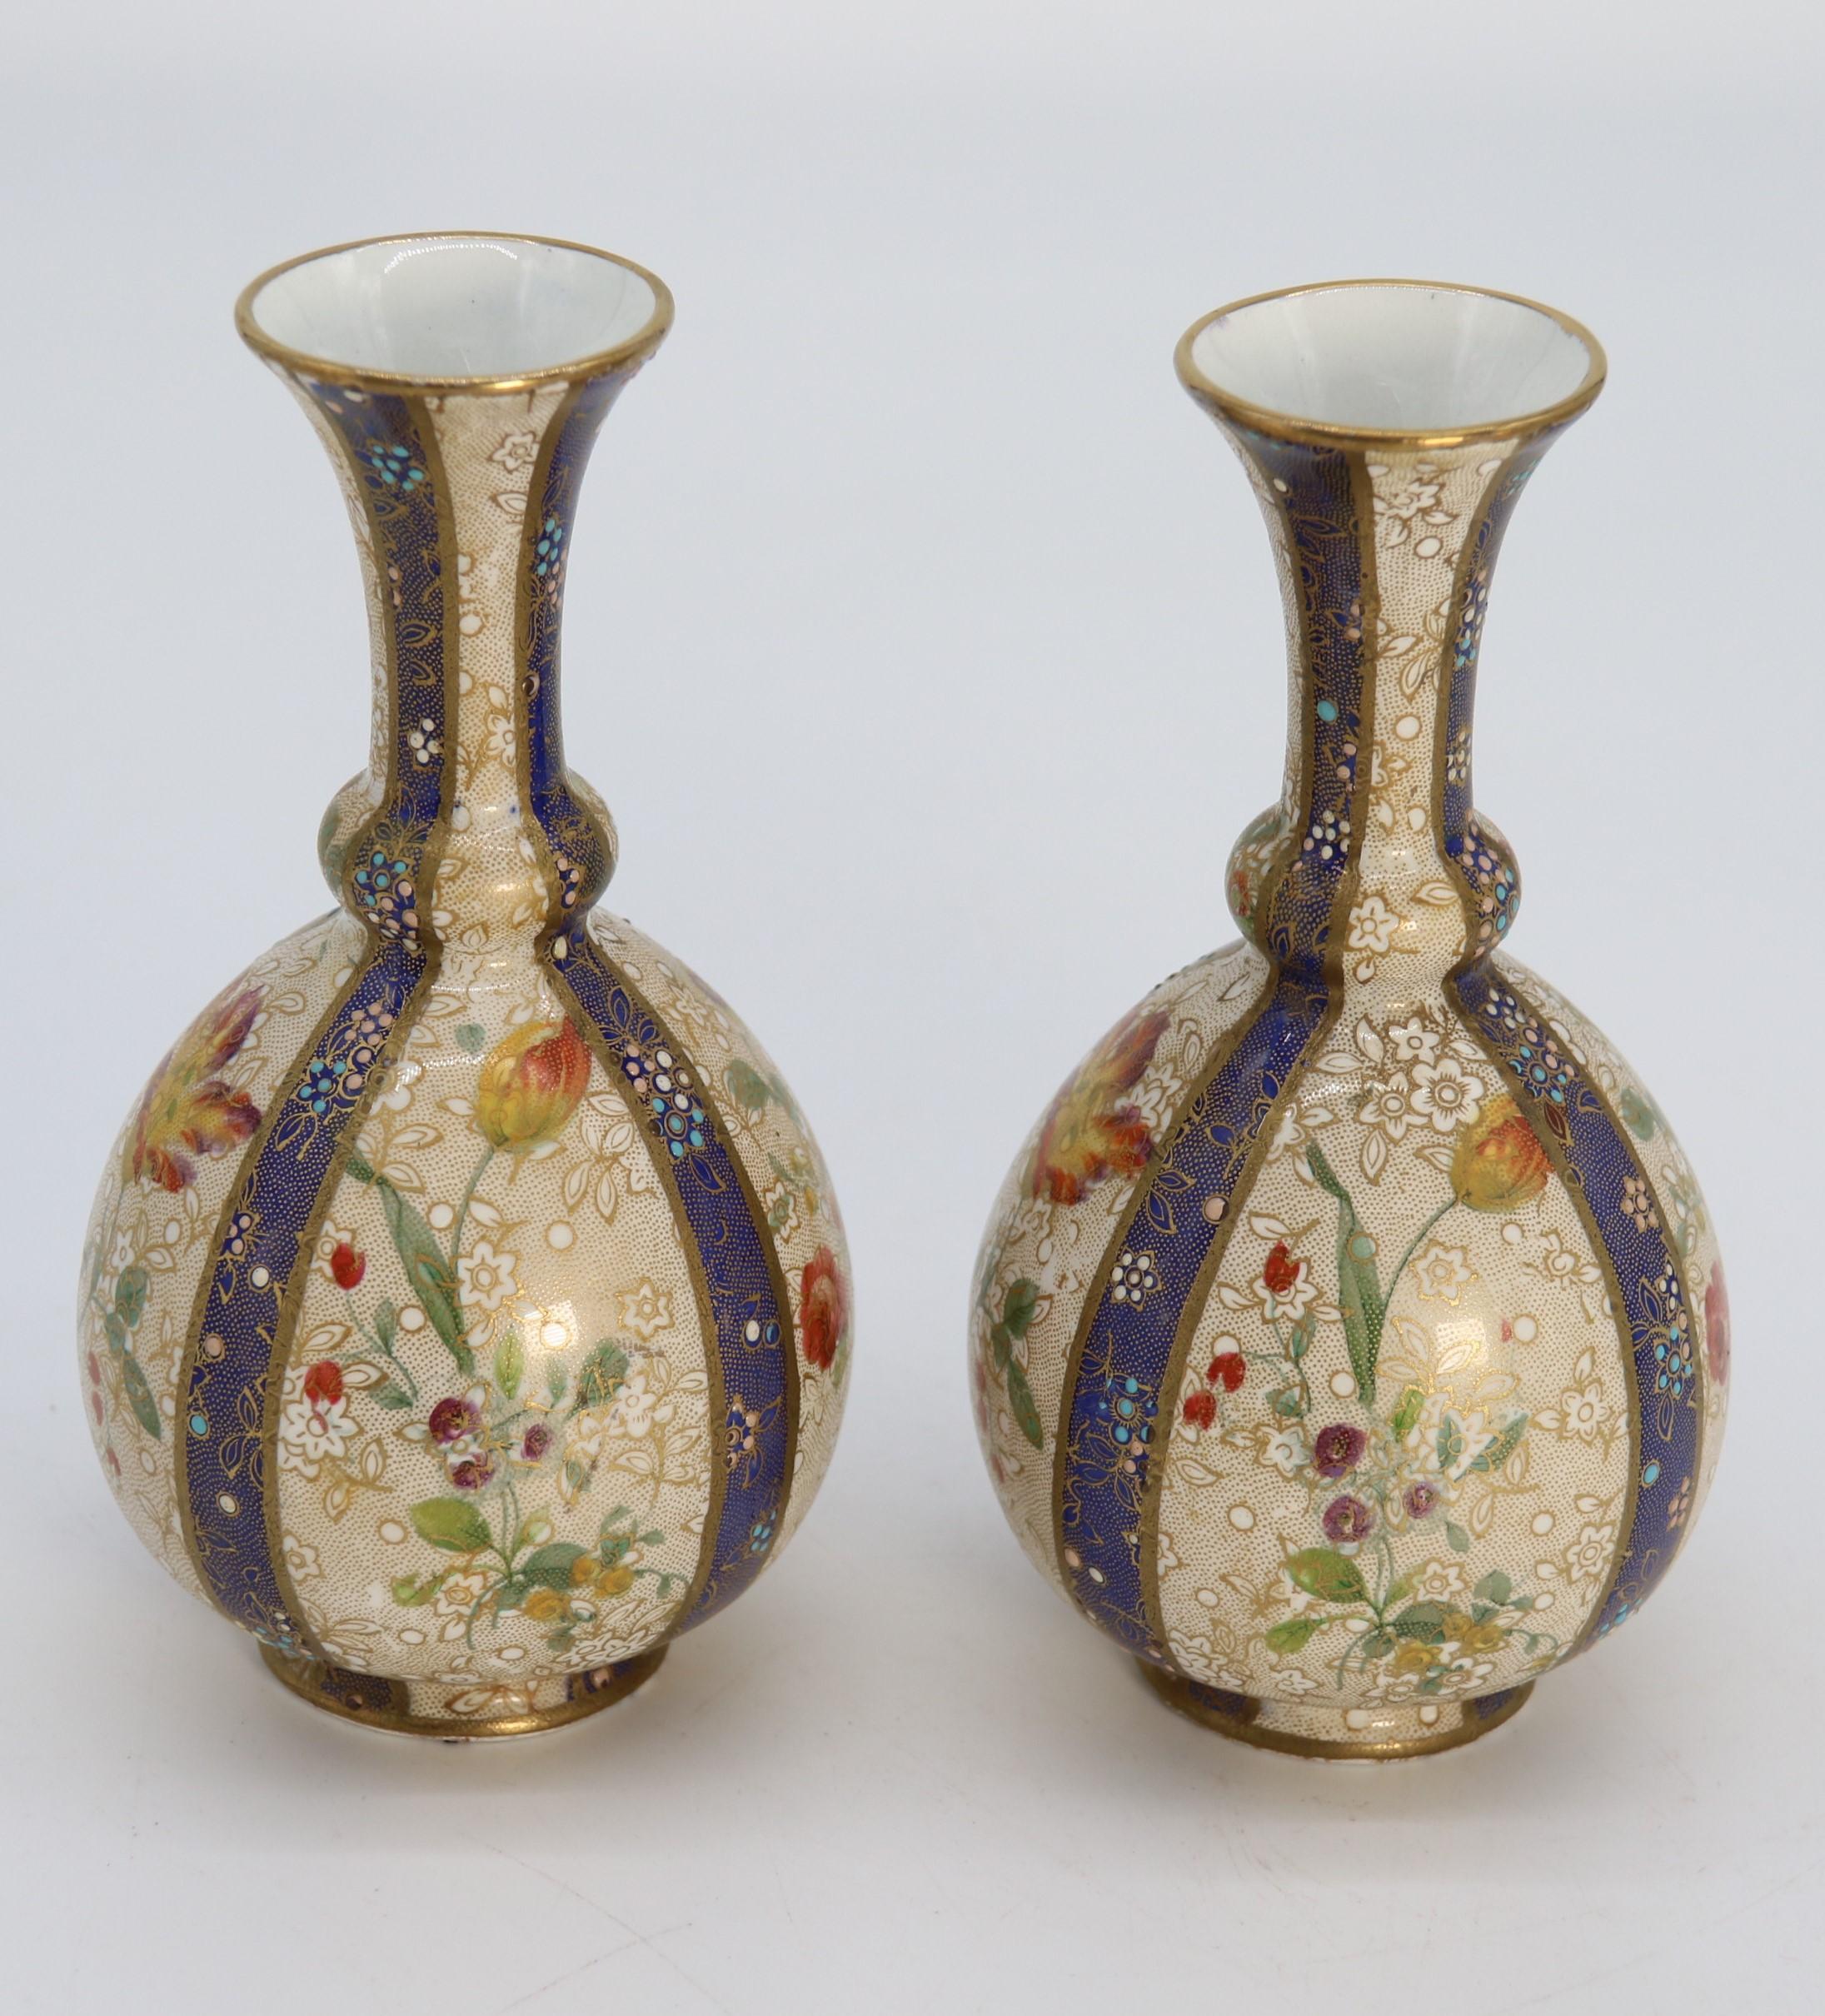 20th Century A pair of English early Carlton Ware enamelled and gilt floral vases, circa 1900